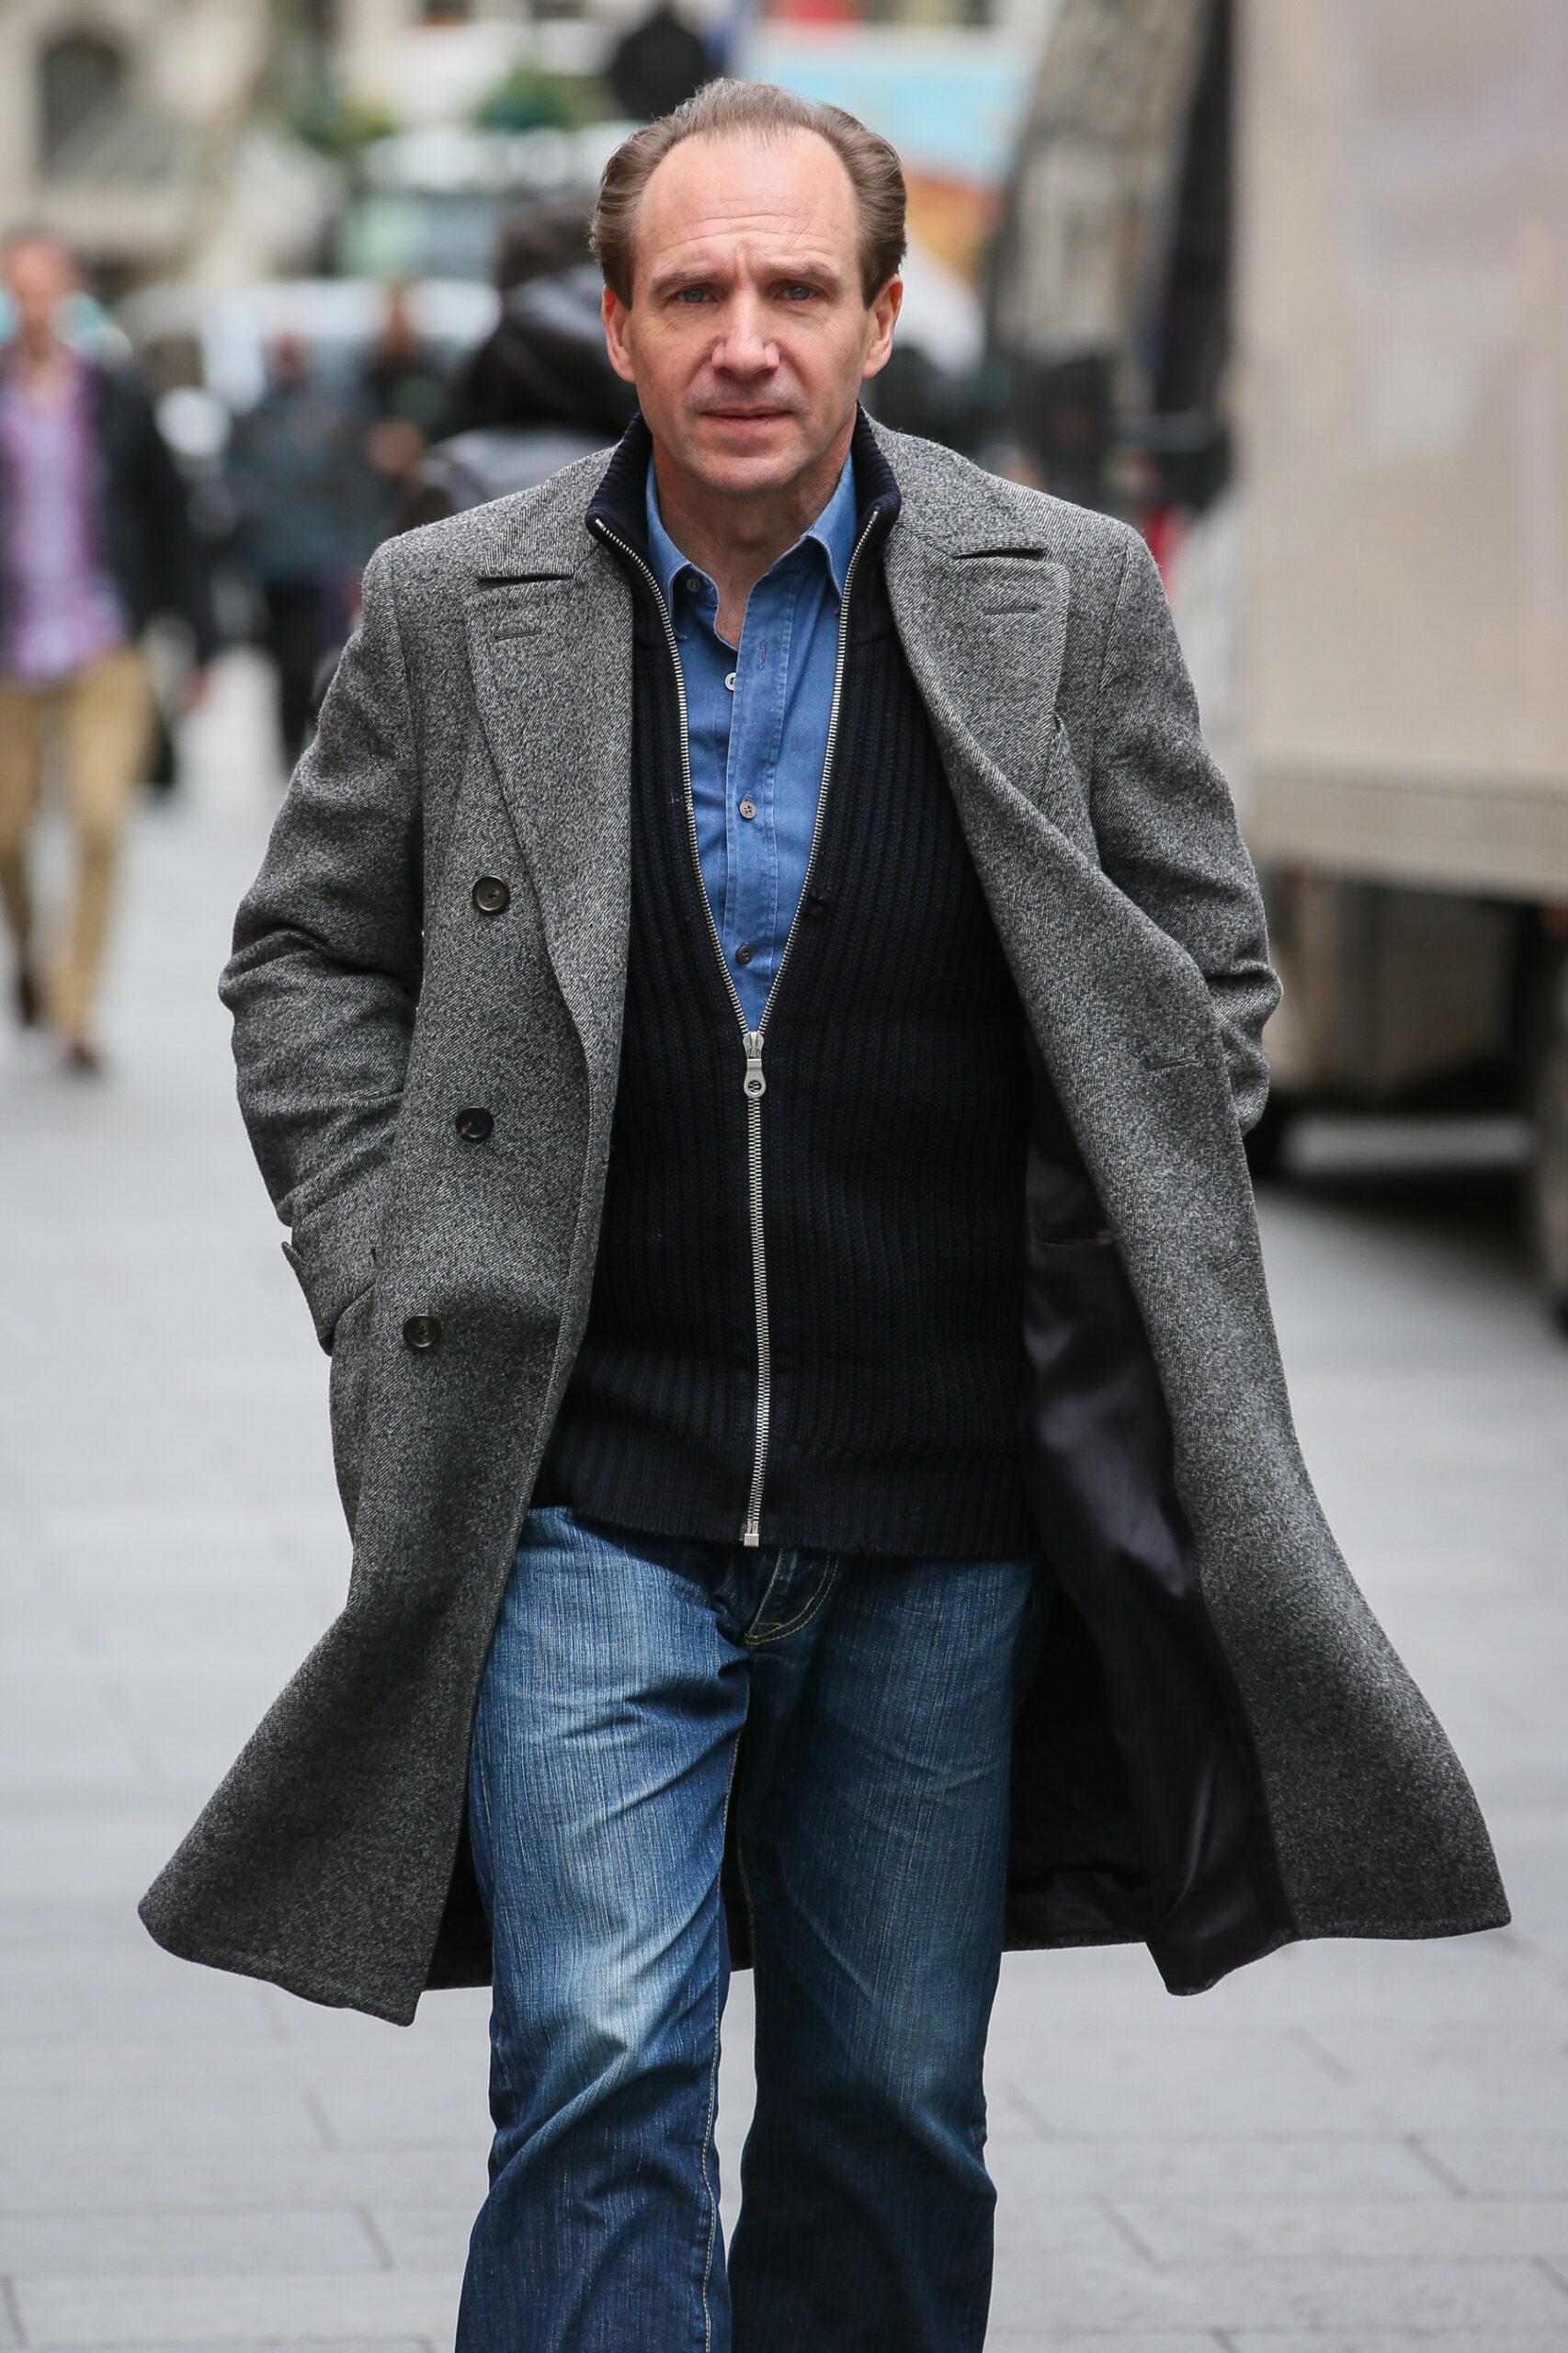 Ralph Fiennes arriving at Global Radio Studios to promote his new Film 'The White Crow' - London